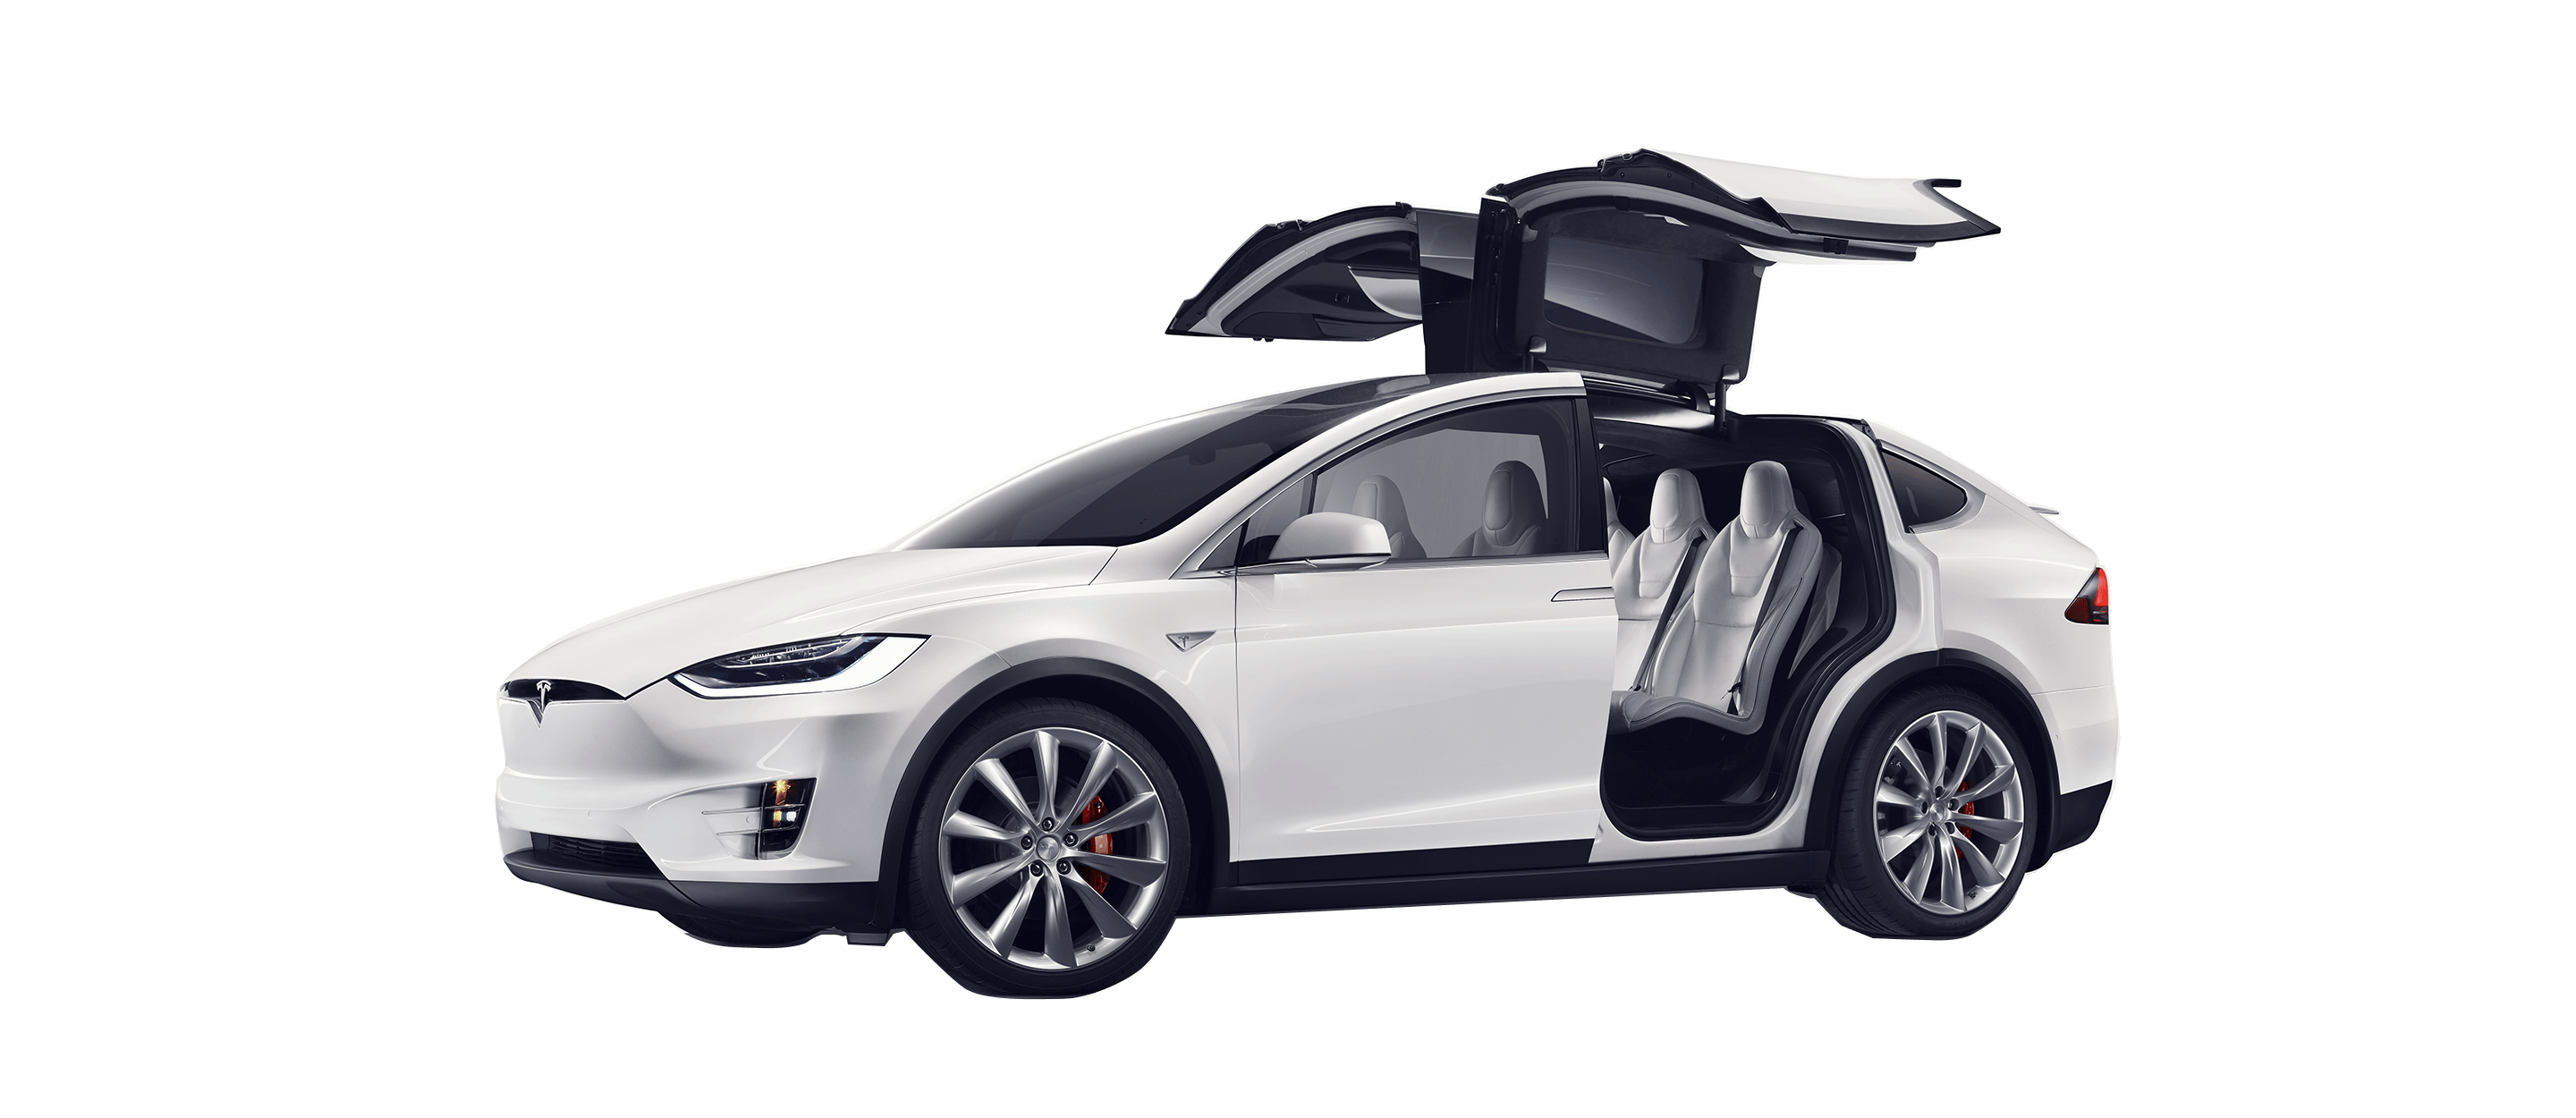 Tesla Motors described the new 2016 Tesla Model X as the SUV uncompromised. In its official website, Tesla said, "Model X is the safest, fastest and most capable sports utility vehicle in history. Standard with all-wheel drive and a 90 kWh battery providing 250 miles of range, Model X has ample seating for seven adults and all of their gear. And it's ludicrously fast, accelerating from zero to 60 miles per hour in as quick as 3.2 seconds."